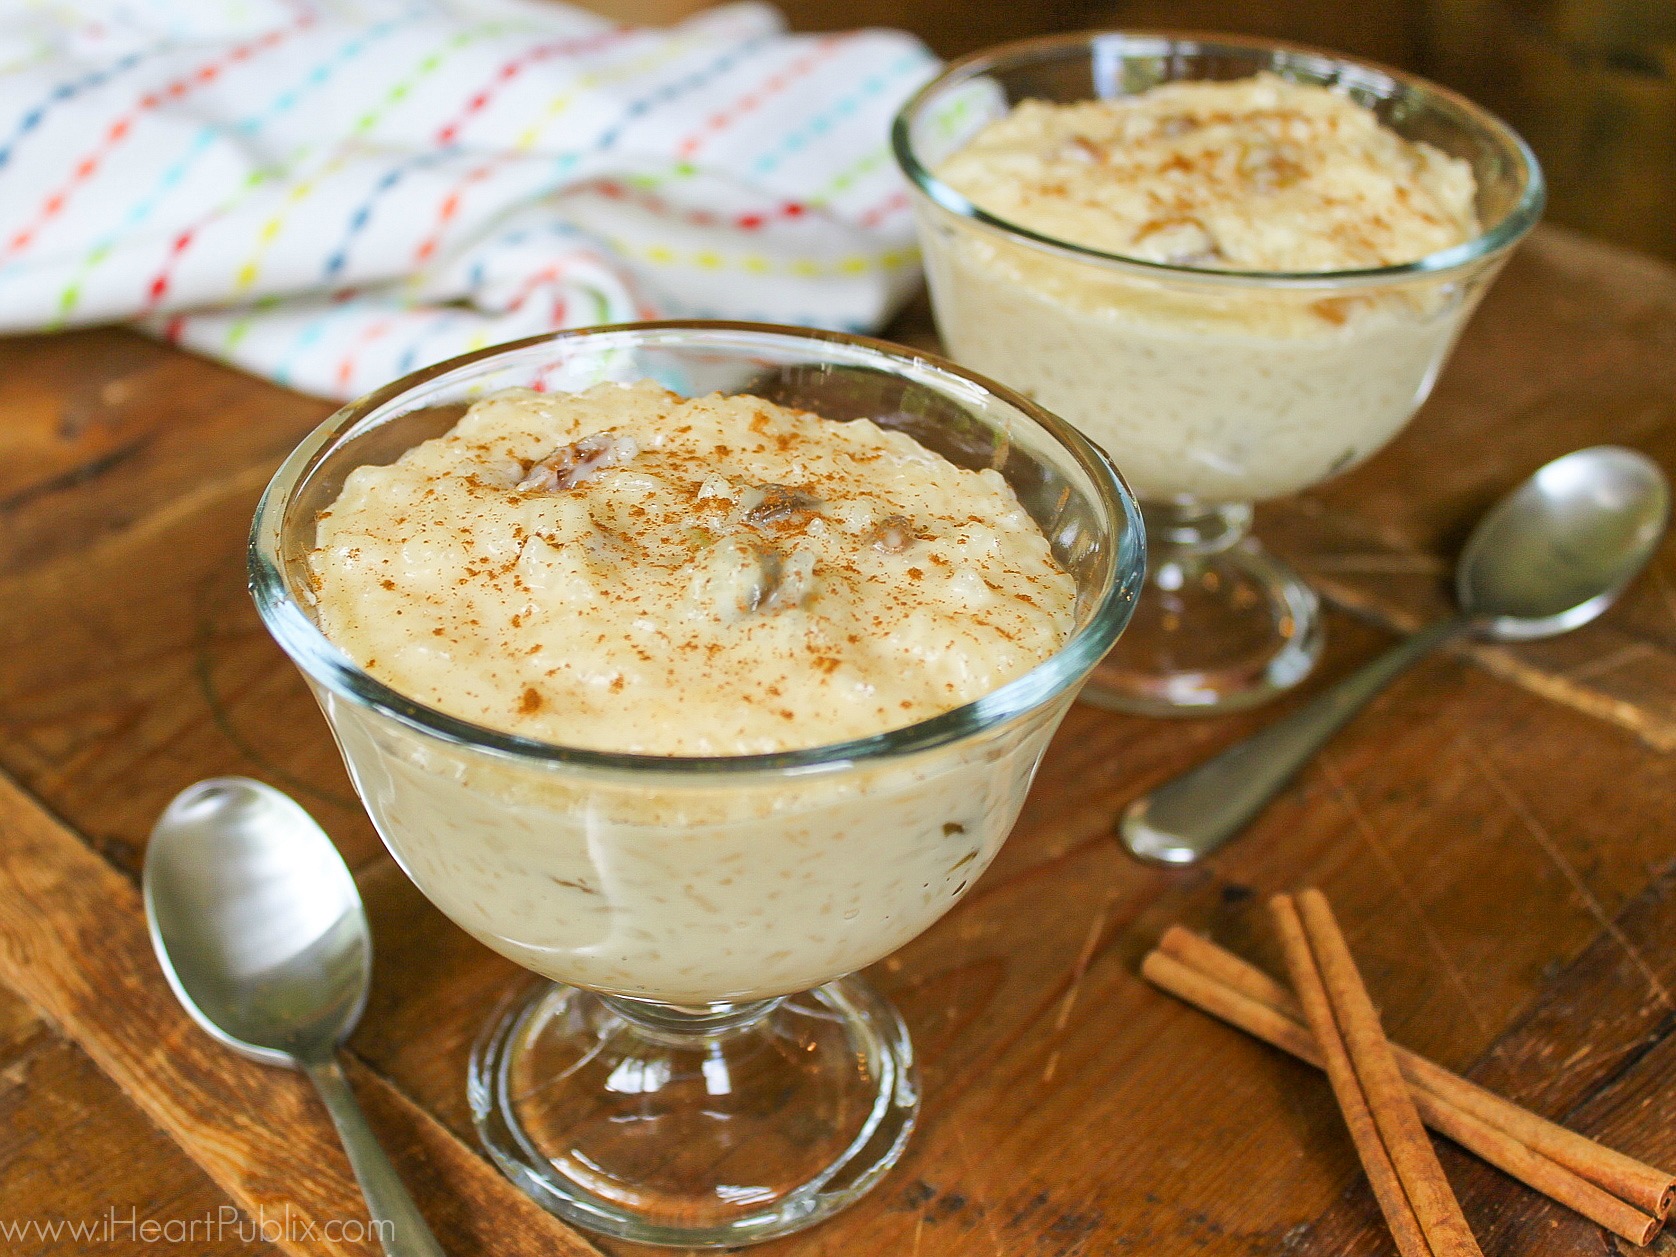 Arroz Con Leche (Mexican Rice Pudding)  - Perfect Recipe To Go With The Big Mahatma Rice Coupon on I Heart Publix